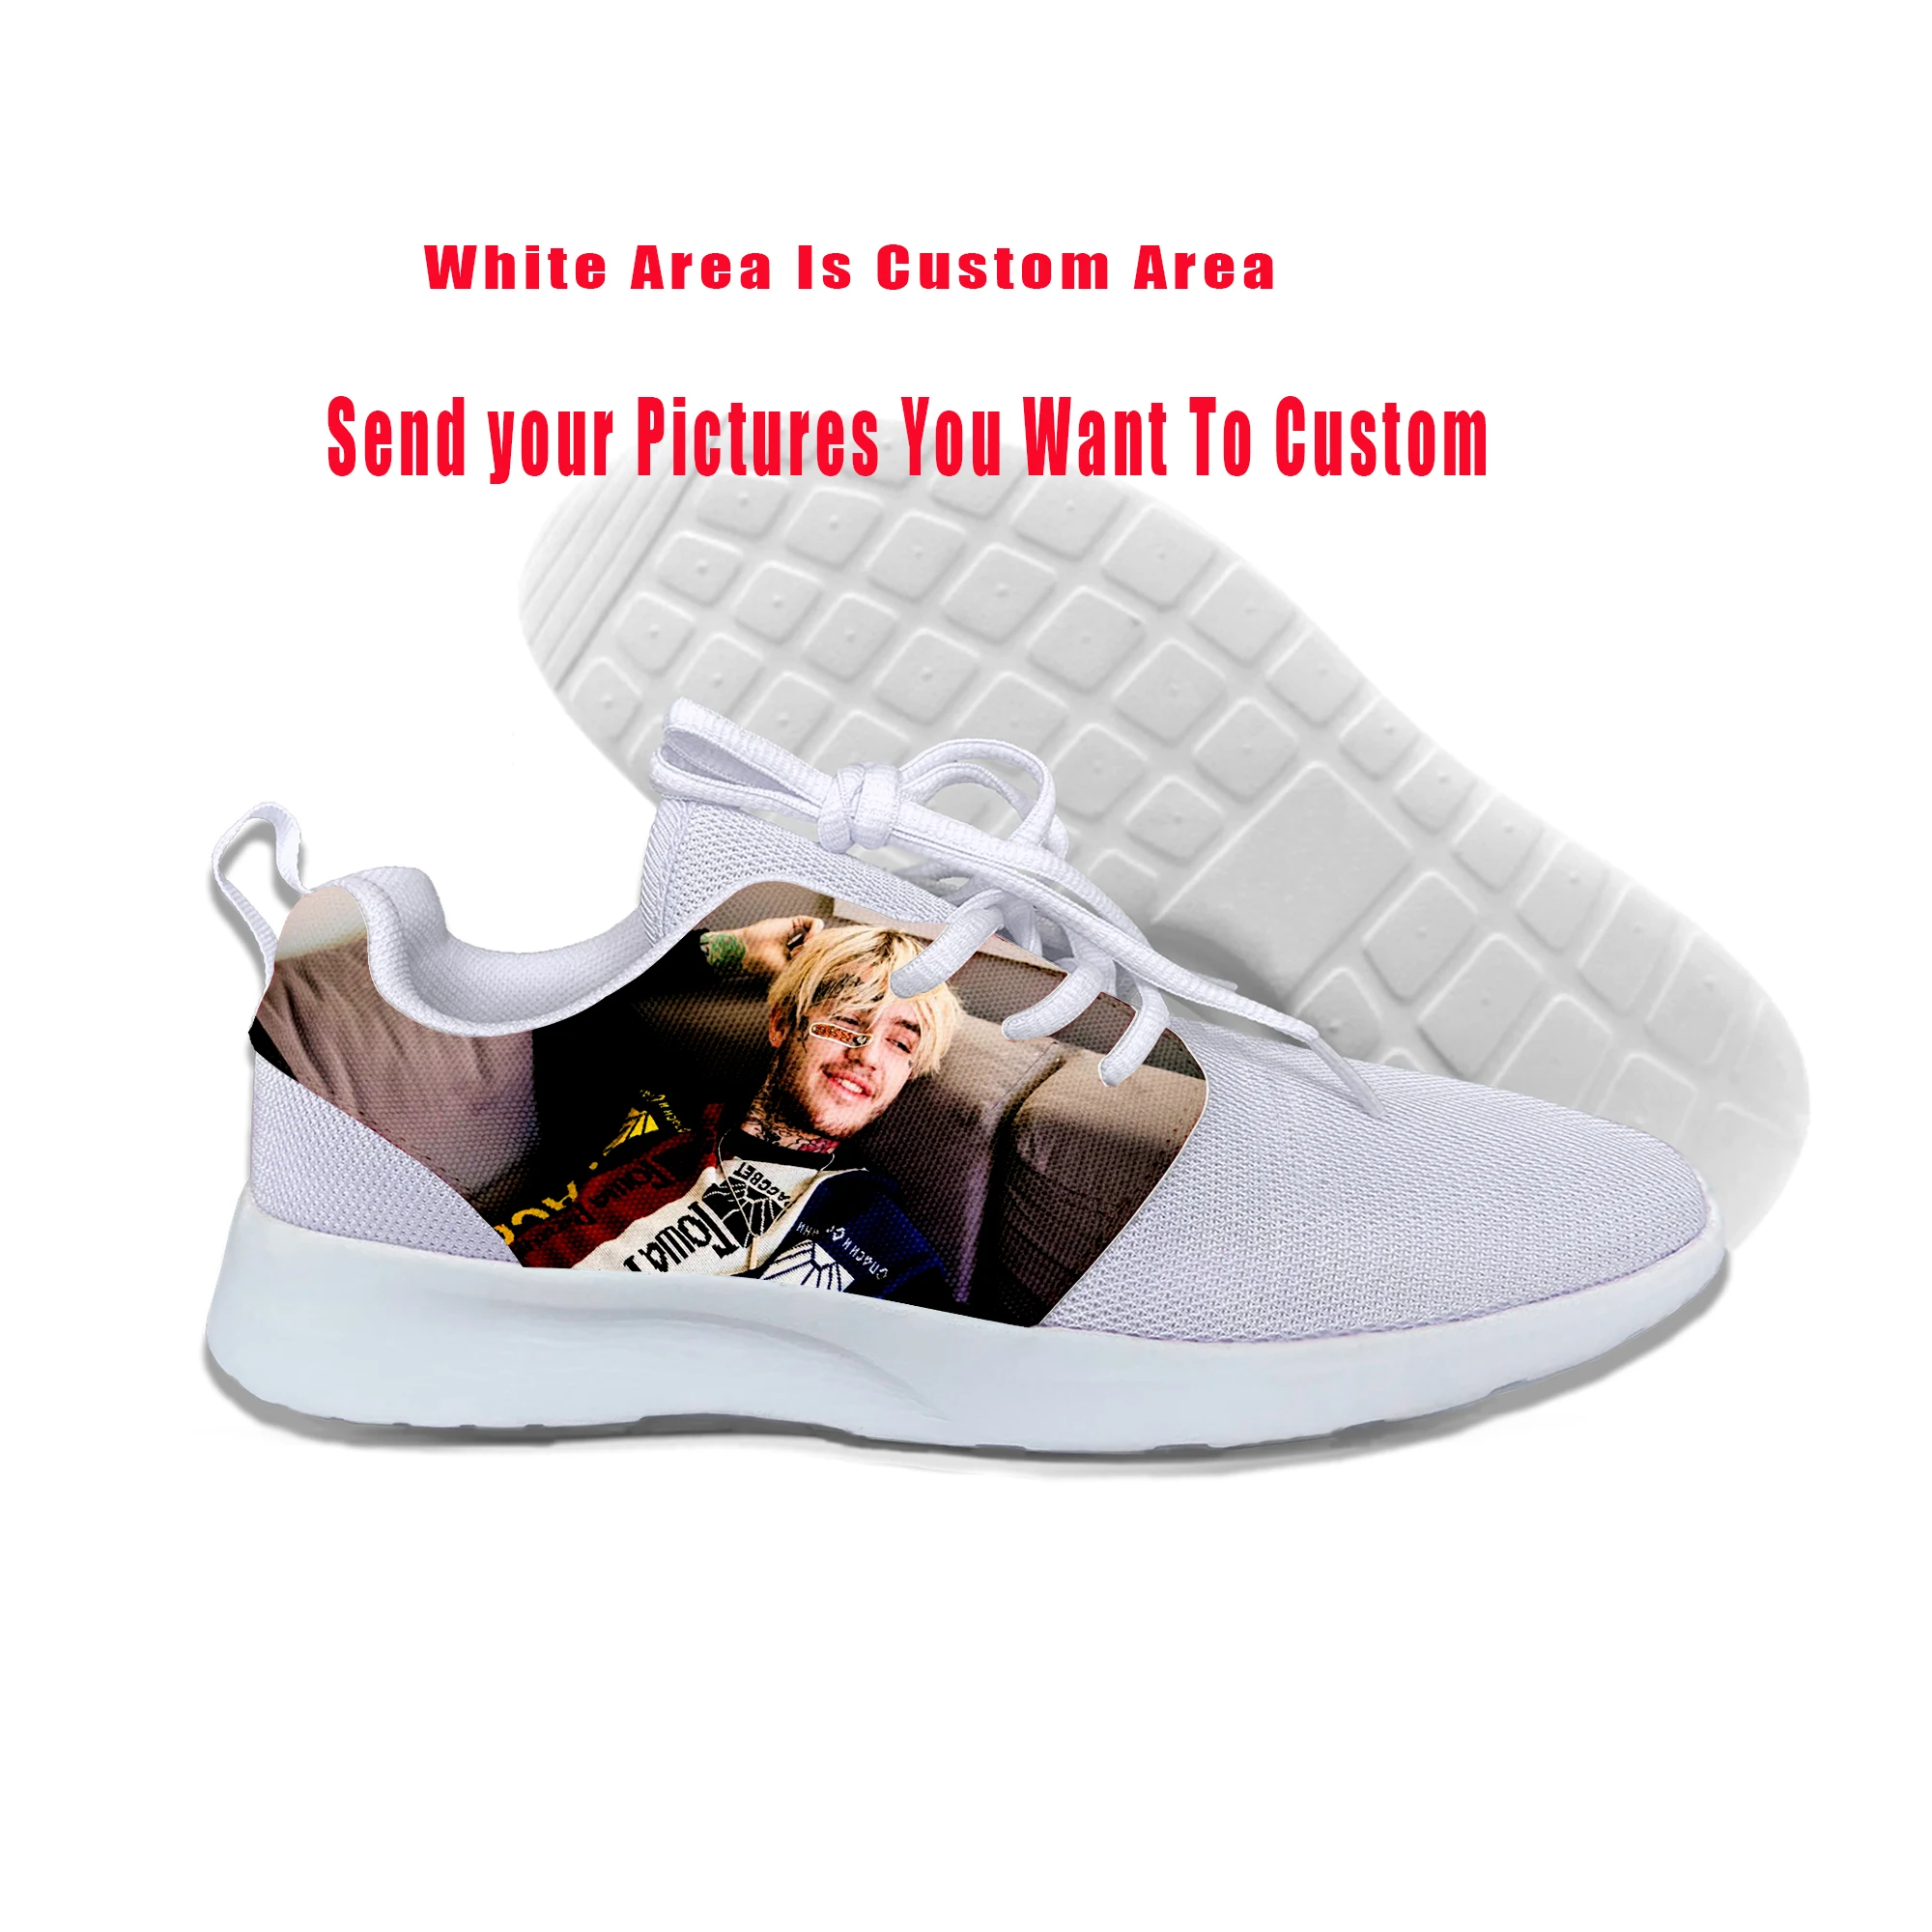 

Hot New Rapper Lil Peep Summer Shoes Rap Hiphop LilPeep Cool Sports Shoes Men Woman Leisure Shoes Mesh Running Shoes Sneakers